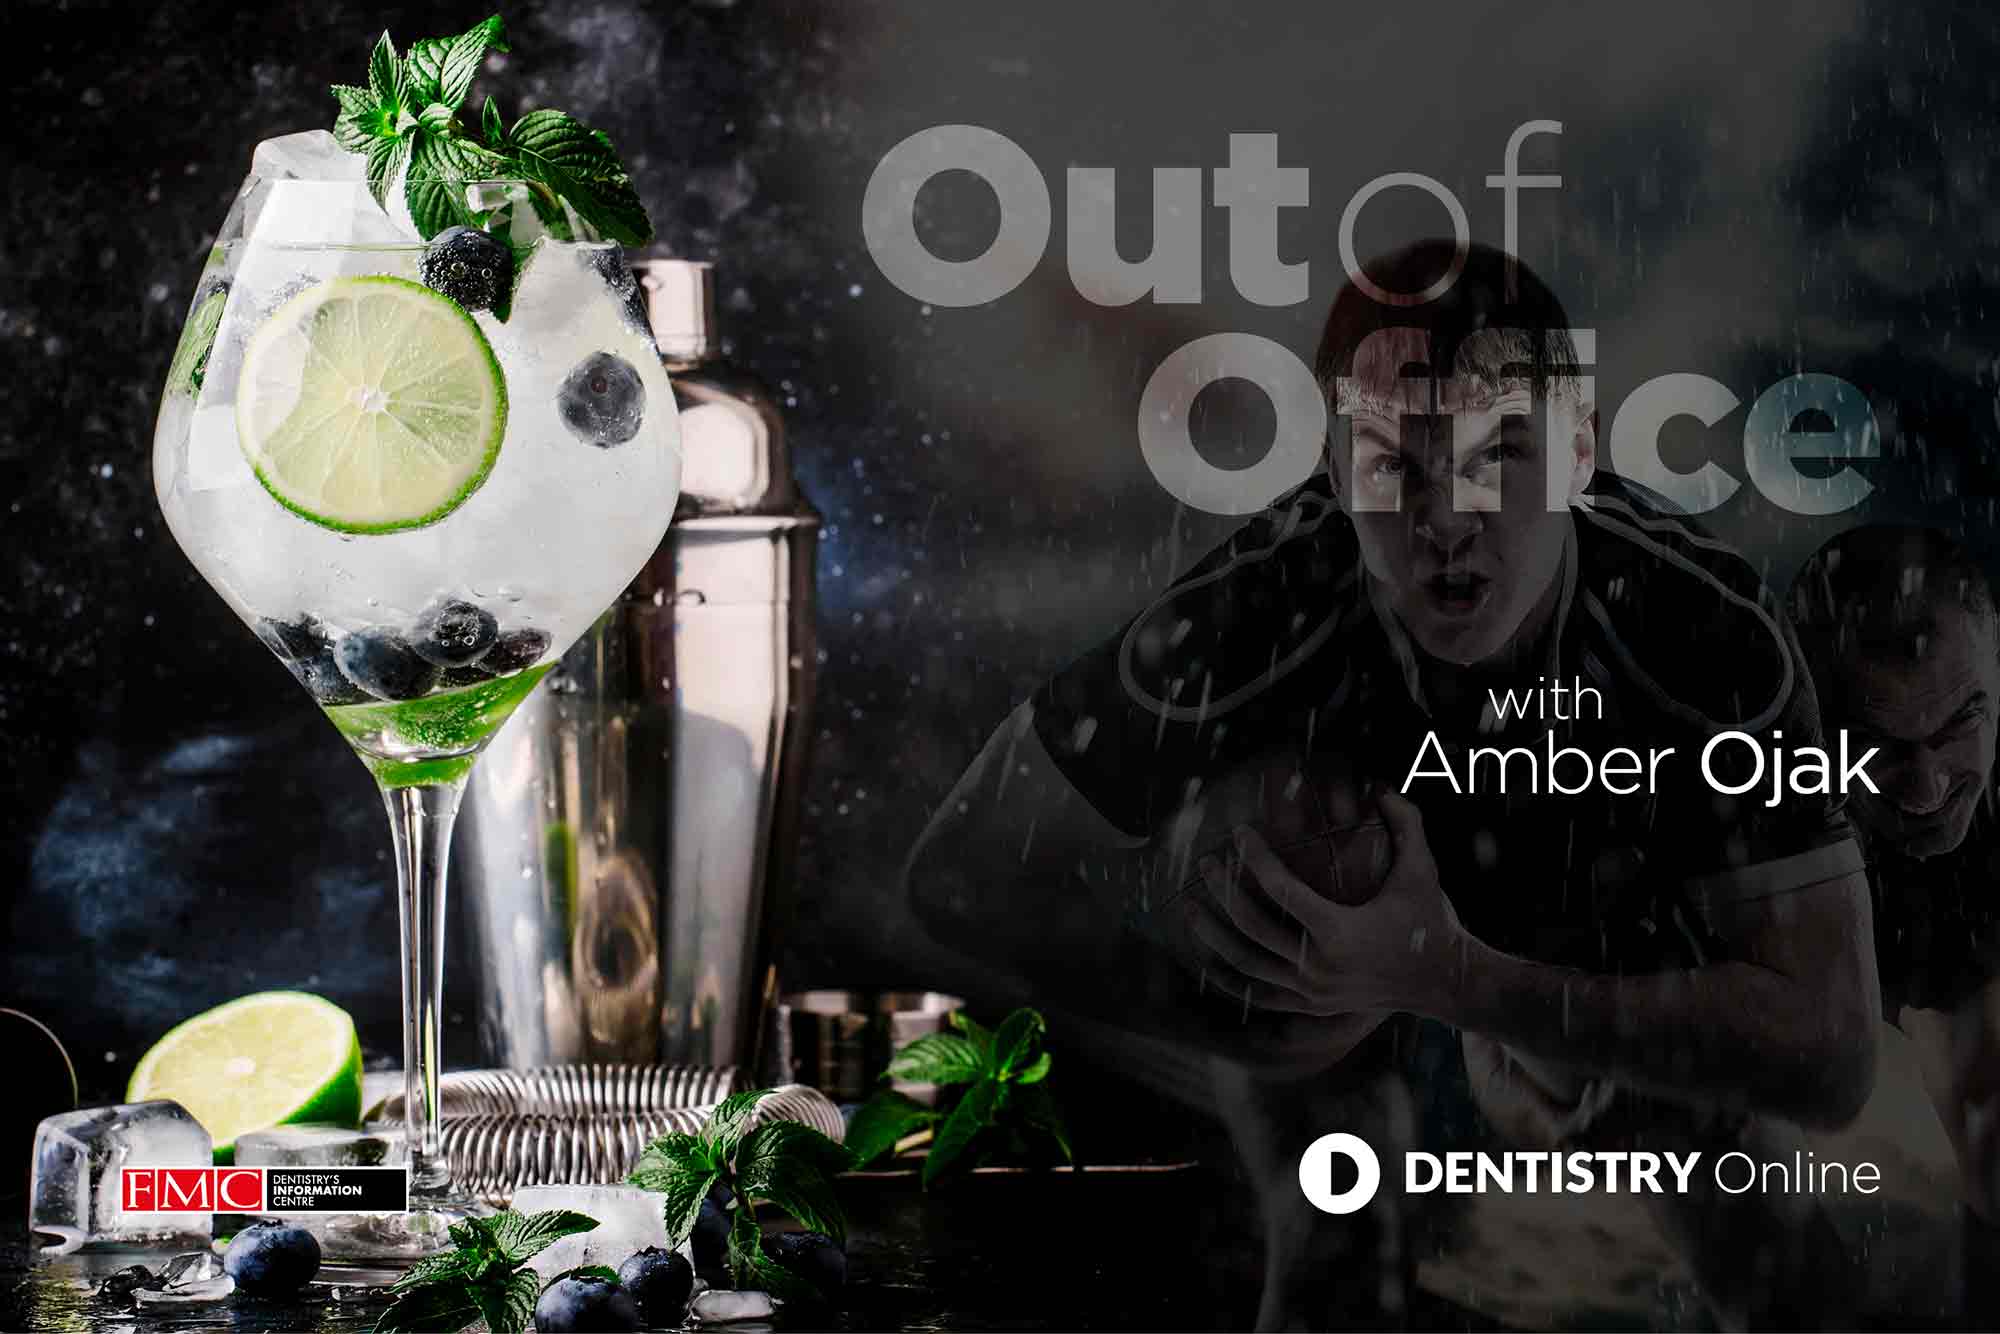 Amber Ojak opens up about her passion for the Six Nations, good food and her 20-bottle gin collection